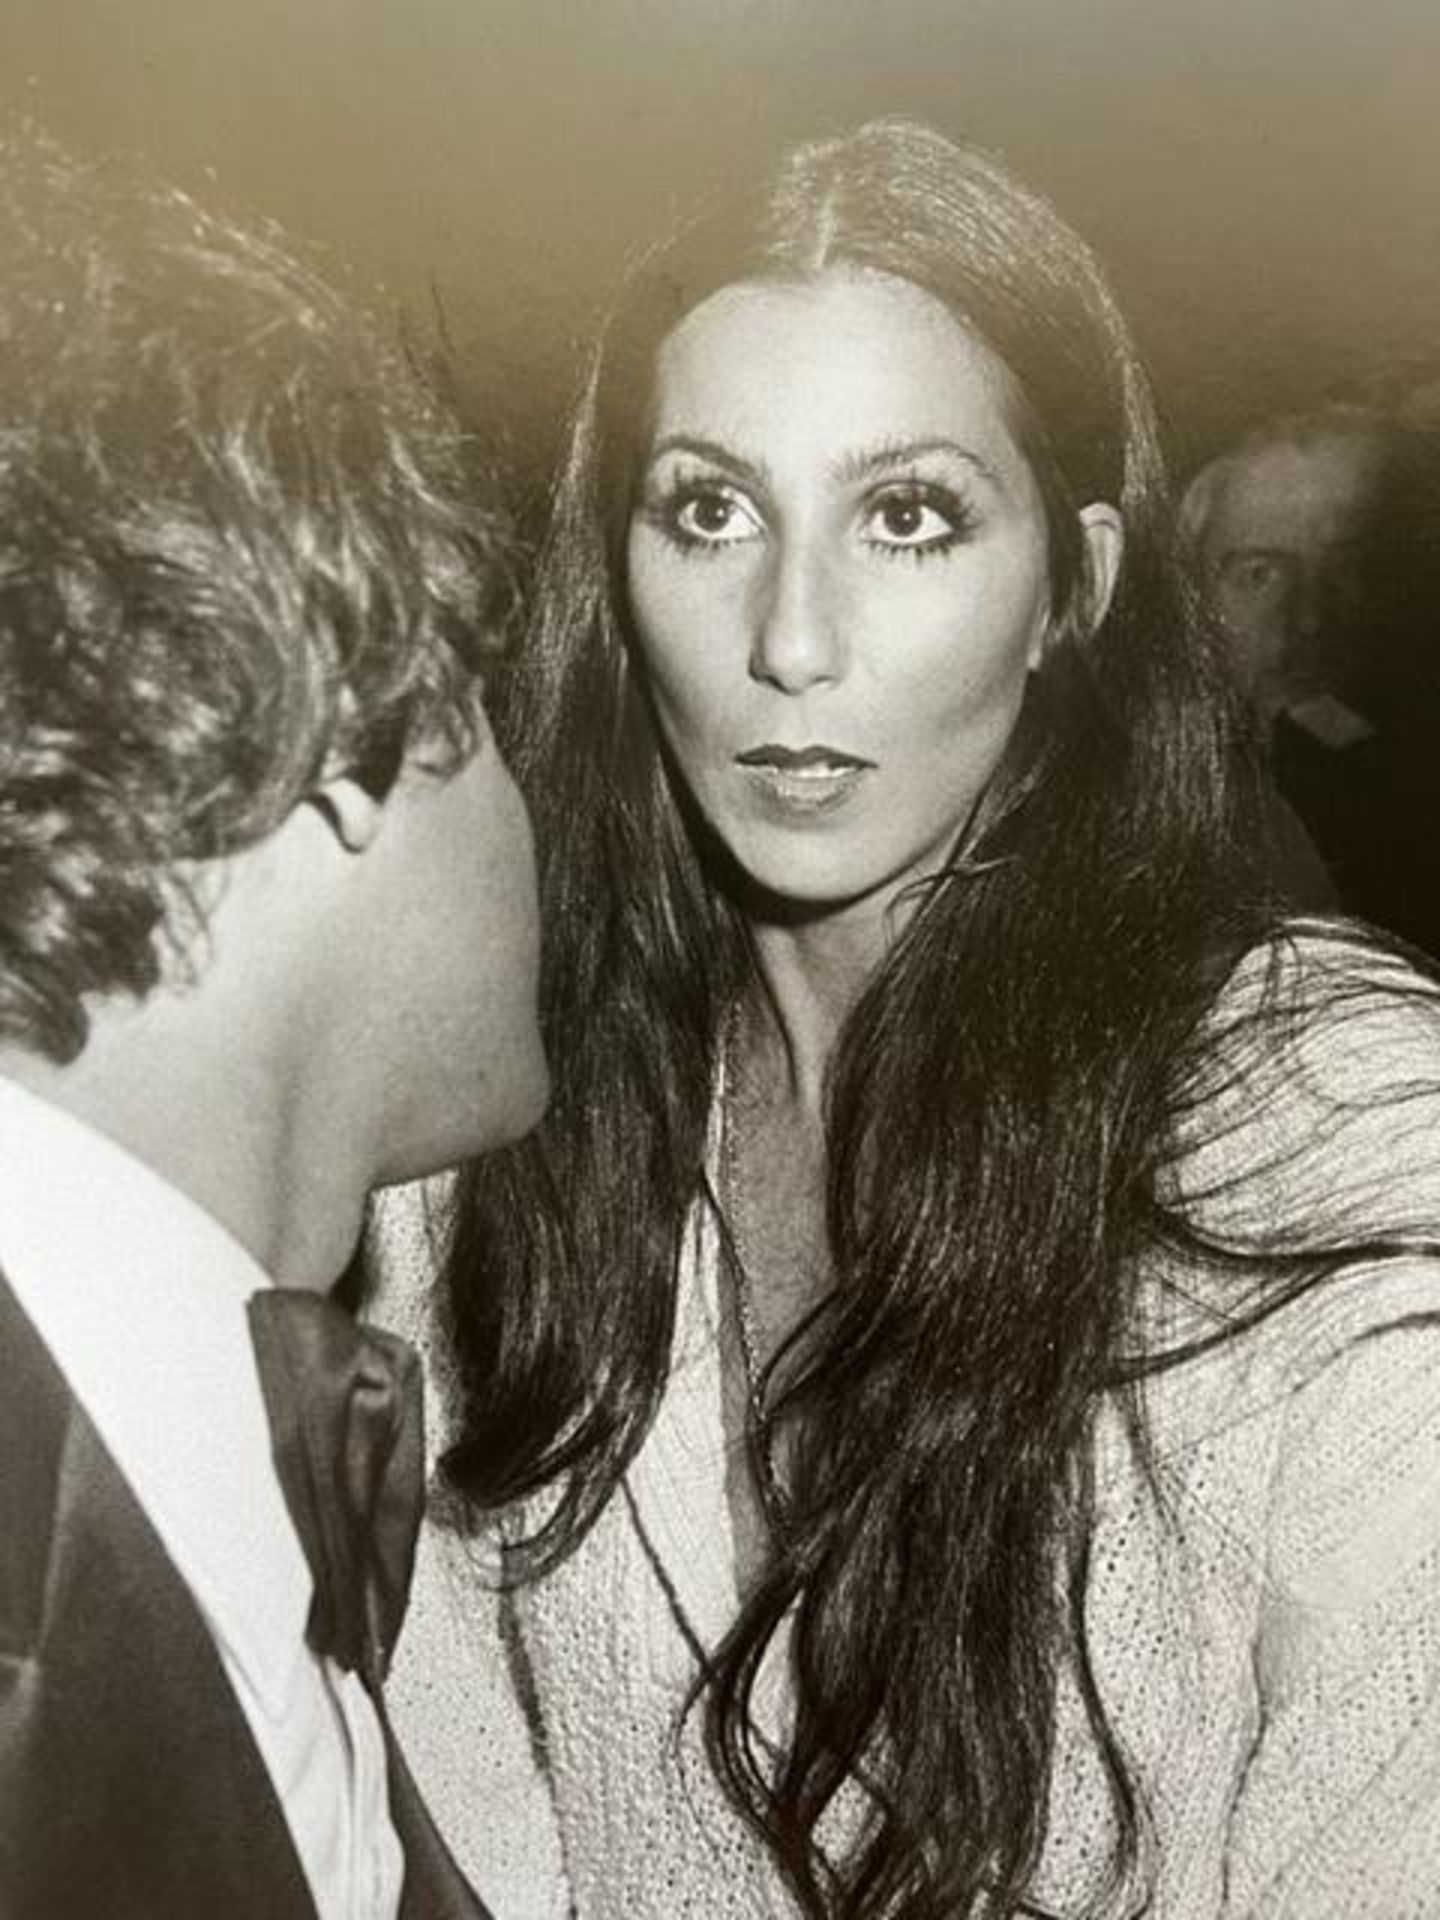 Ian Schrager "Cher with Steve" Print. - Image 2 of 6